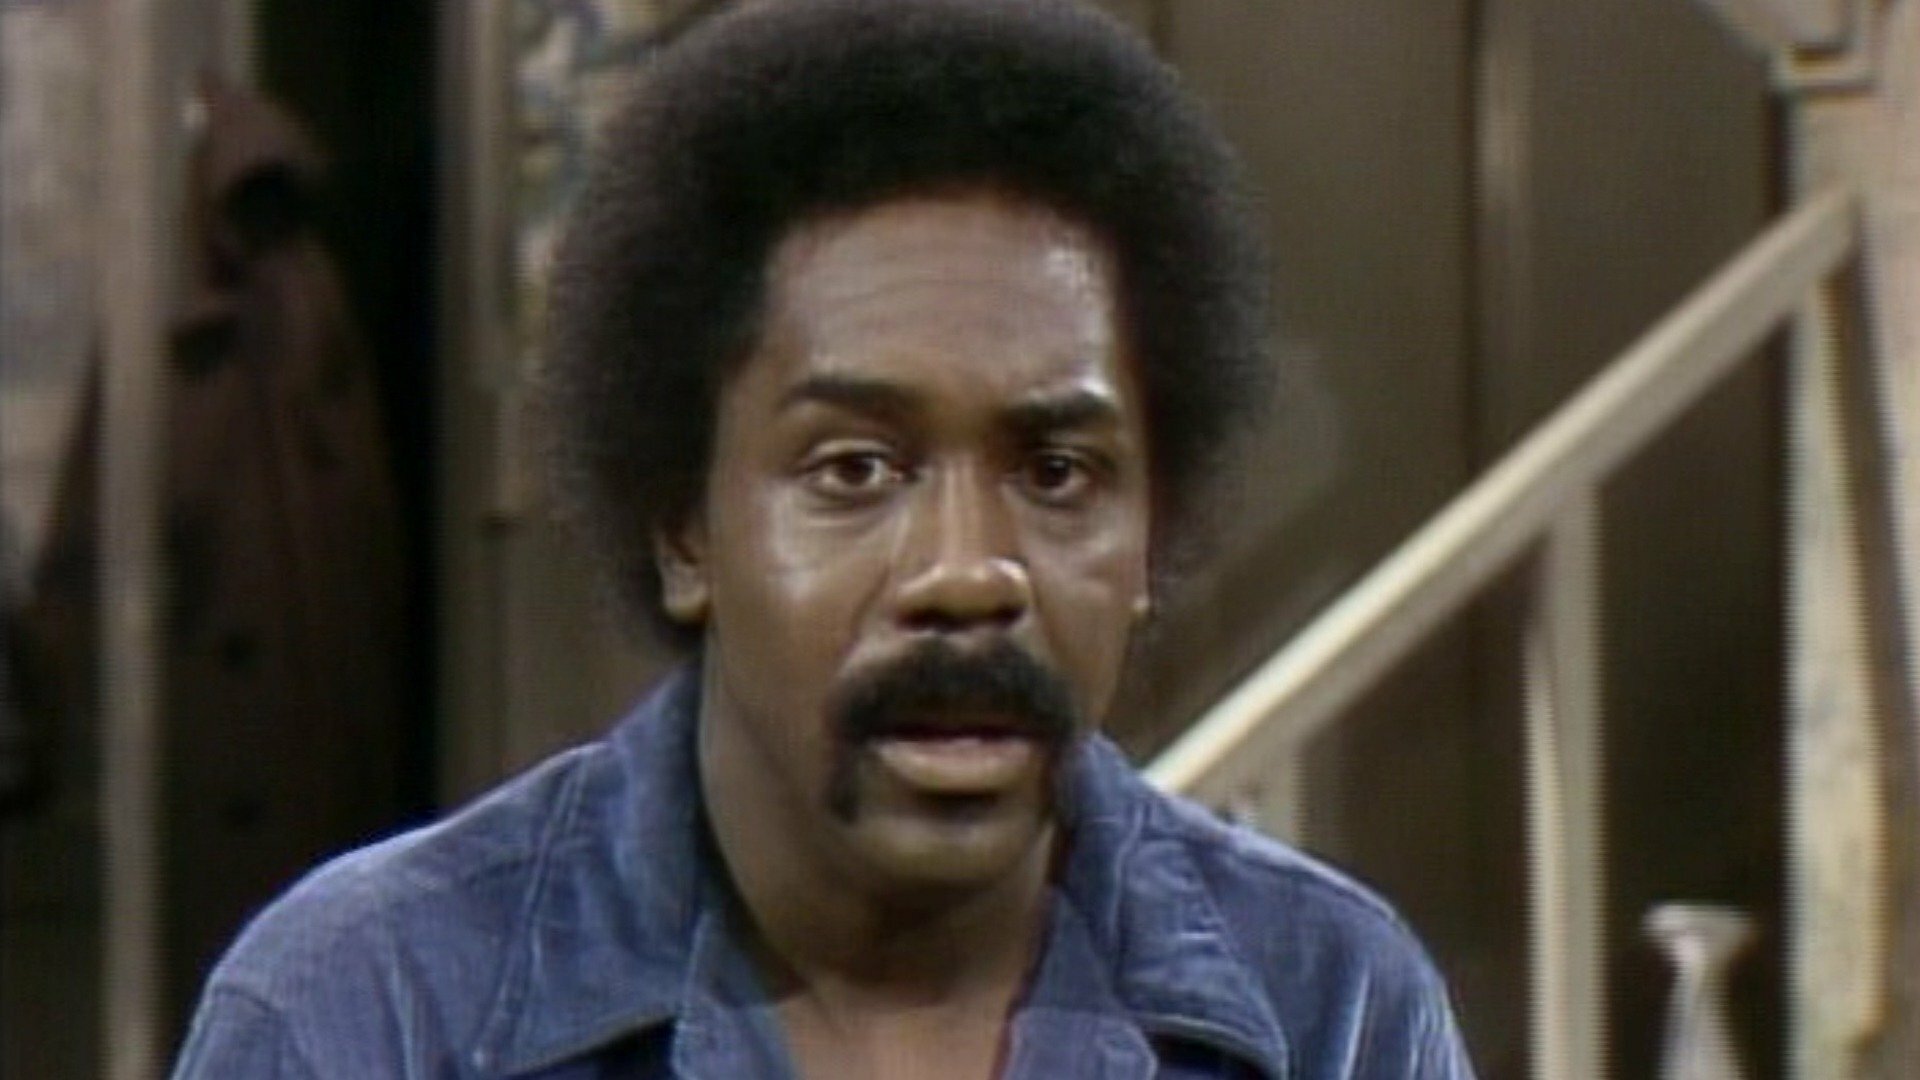 Sanford and Son Season 1 Episode 5 - A Matter of Life and Breath